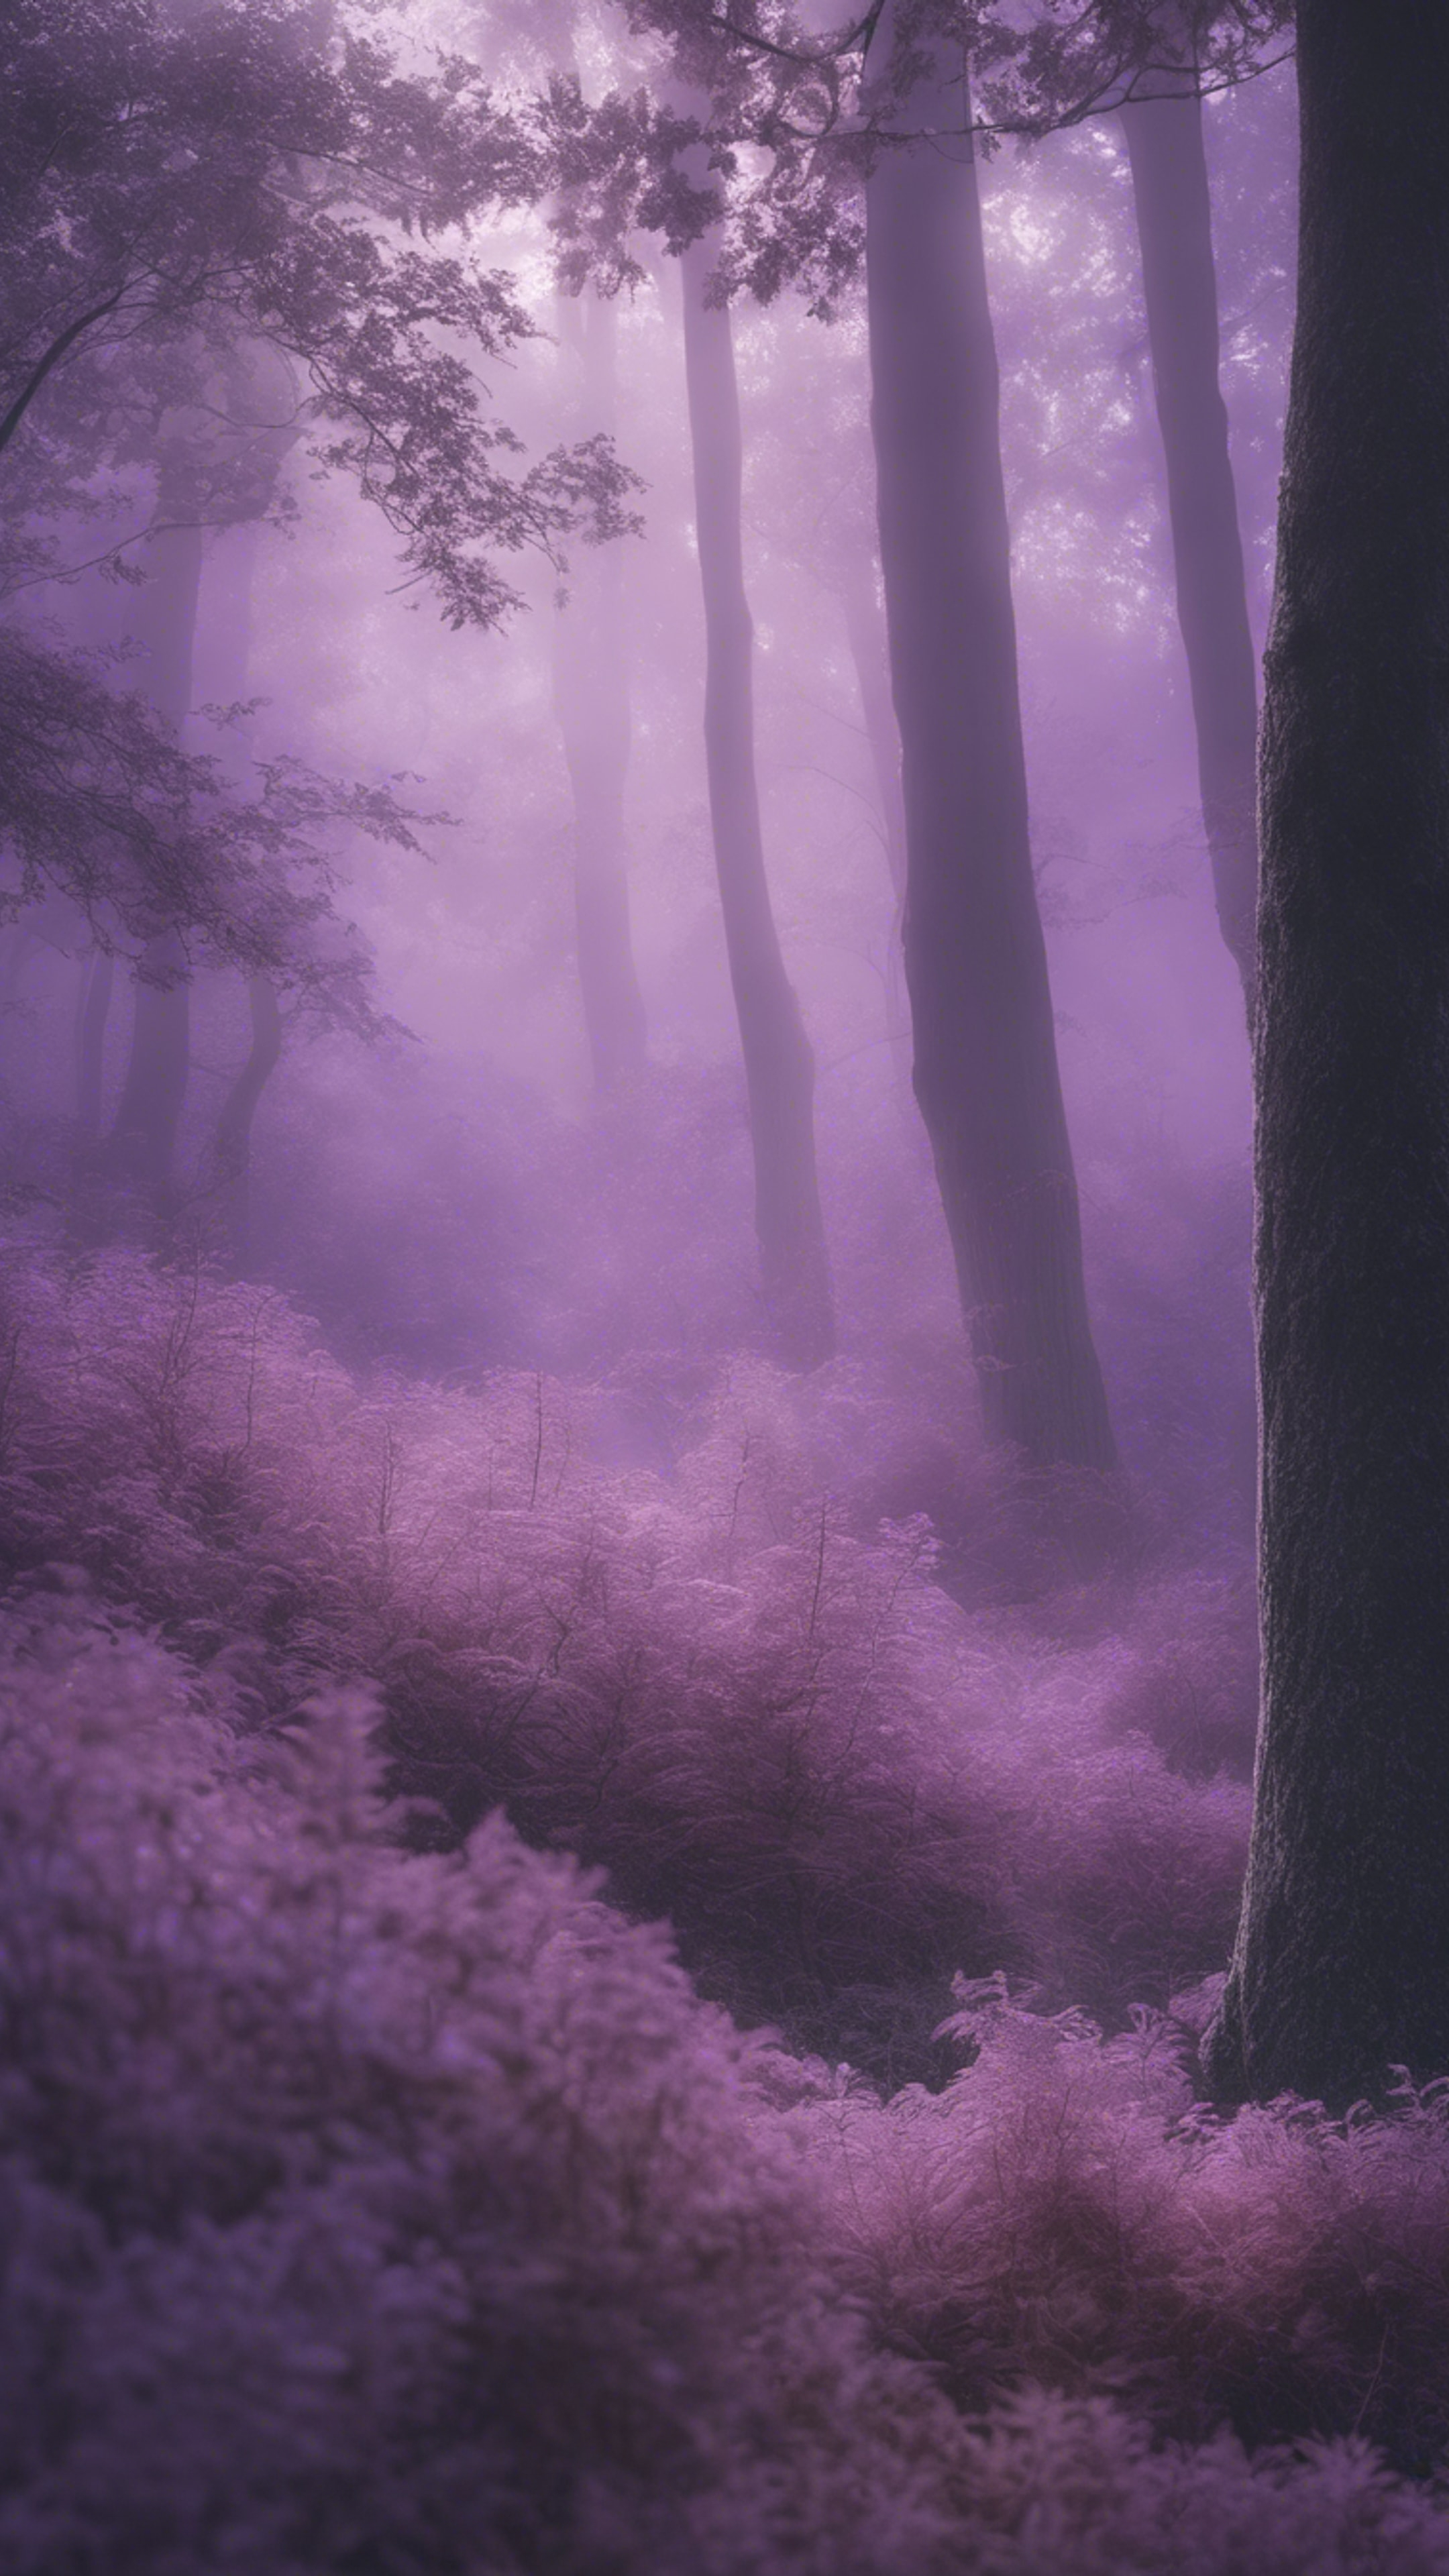 Ethereal scene of a tranquil forest bowed under a silky layer of light purple fog. Wallpaper[581b7126aa2a4d368dd8]